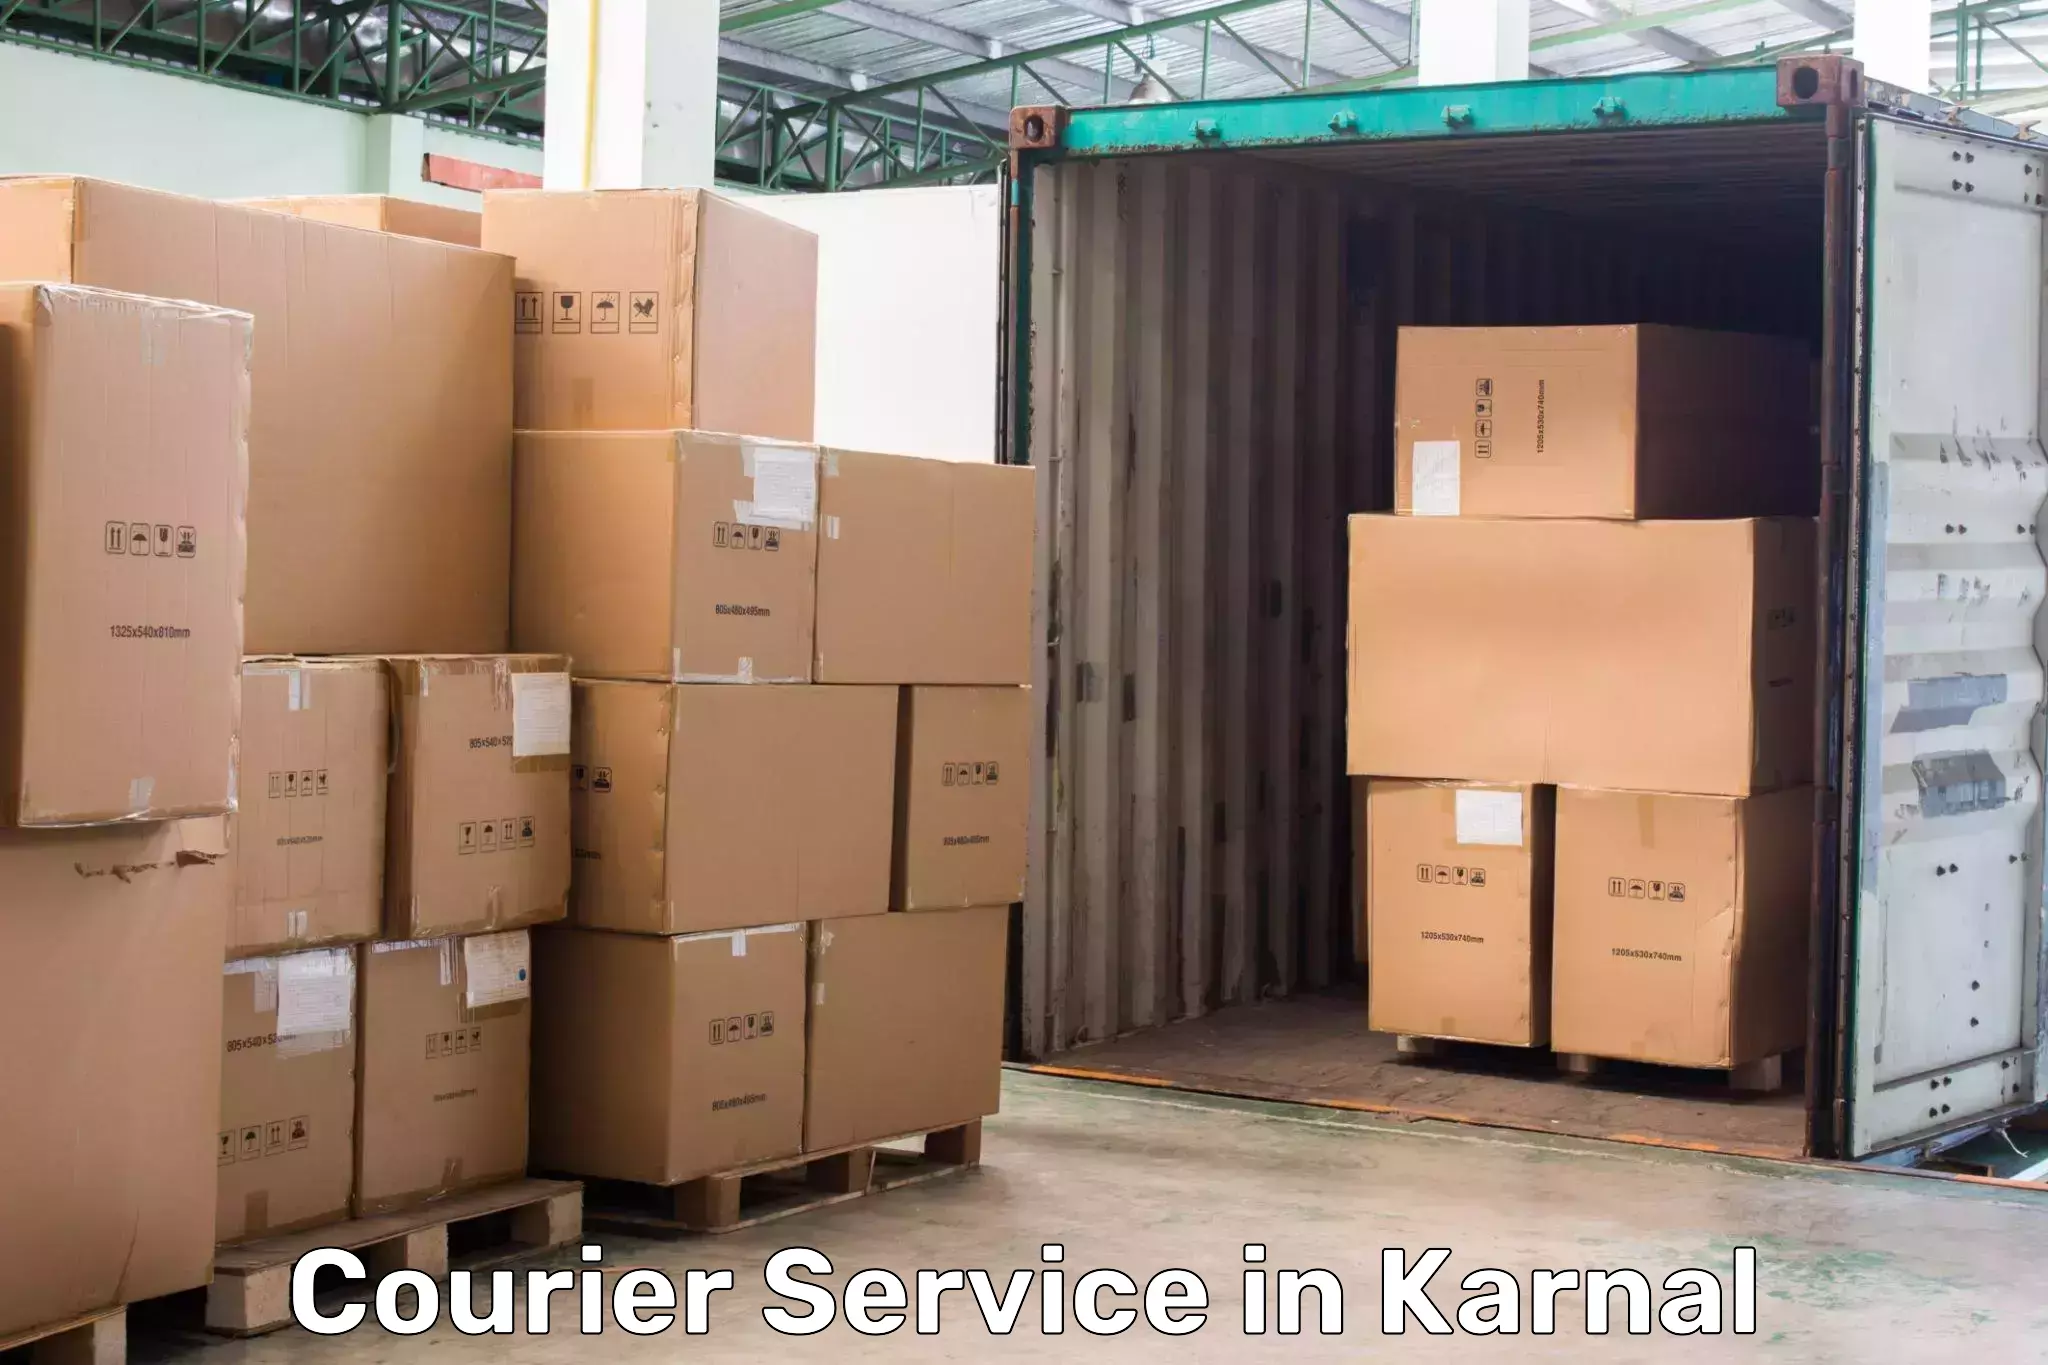 Tech-enabled shipping in Karnal